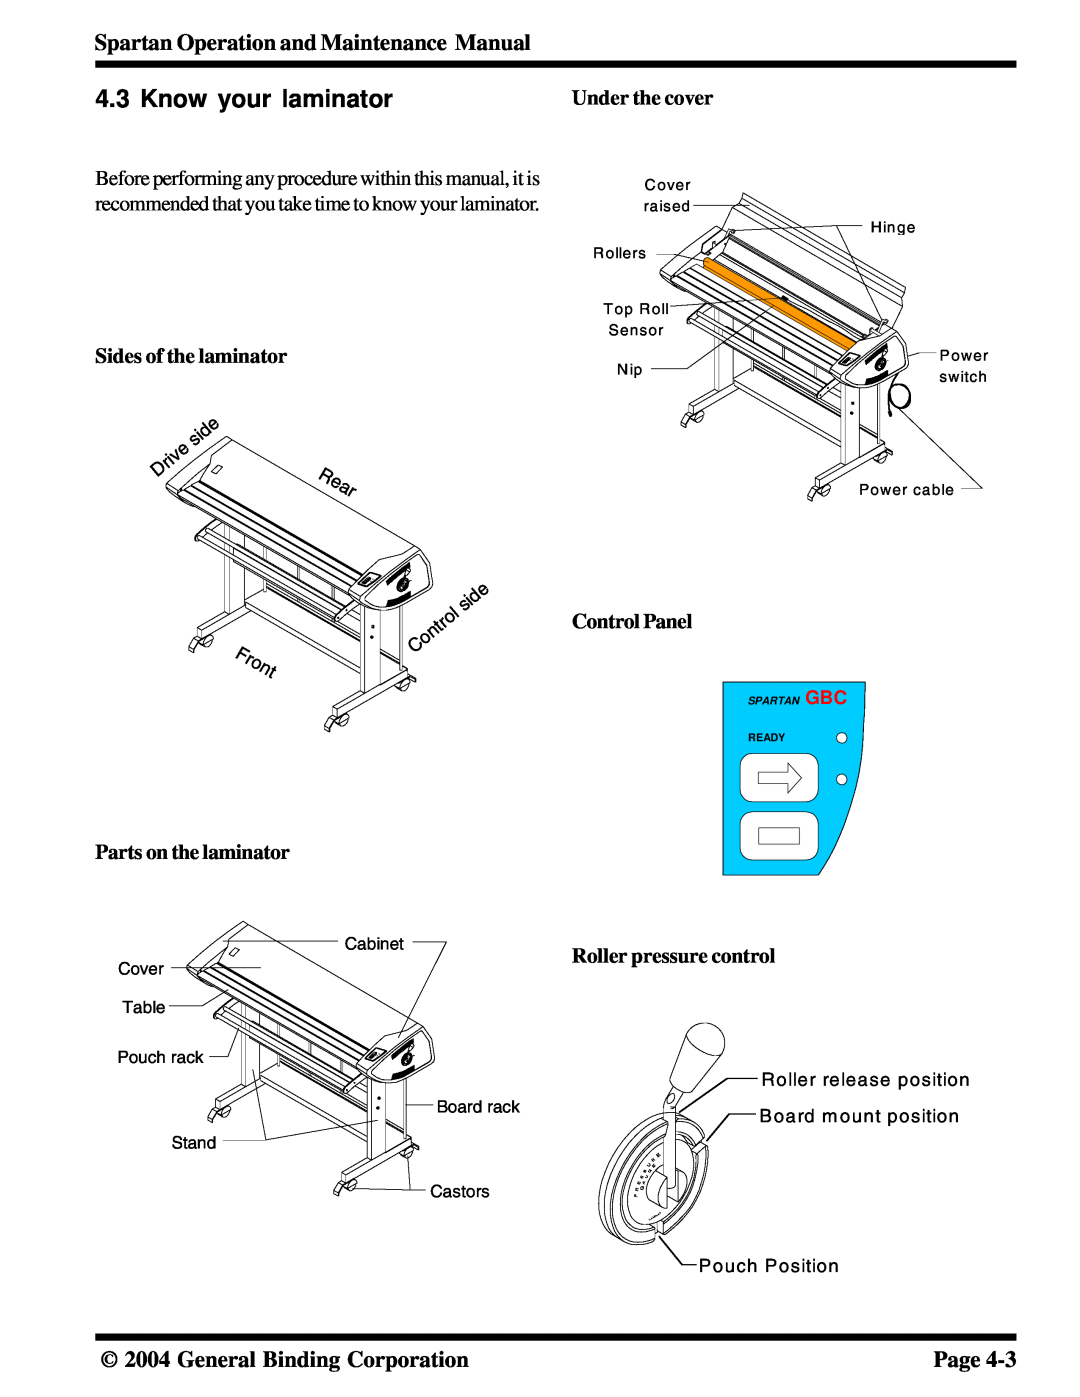 GBC 930-073 Know your laminator, Front, Rear, Roller release position Board m ount position, Pouch Position, Cabinet Cover 